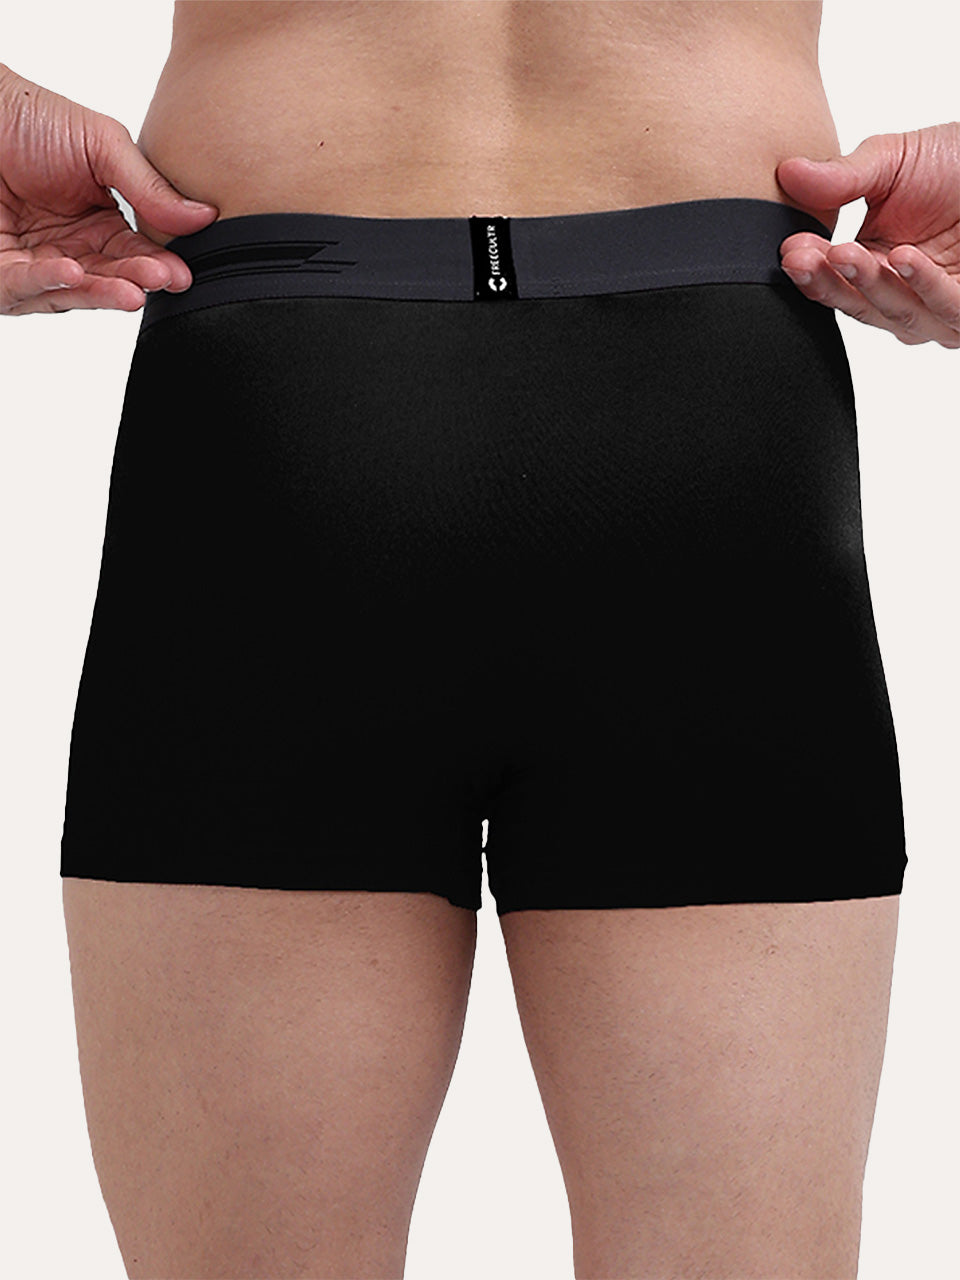 Men's Anti-Bacterial Micro Modal Trunk in Contrast Waistband (Pack of 2)